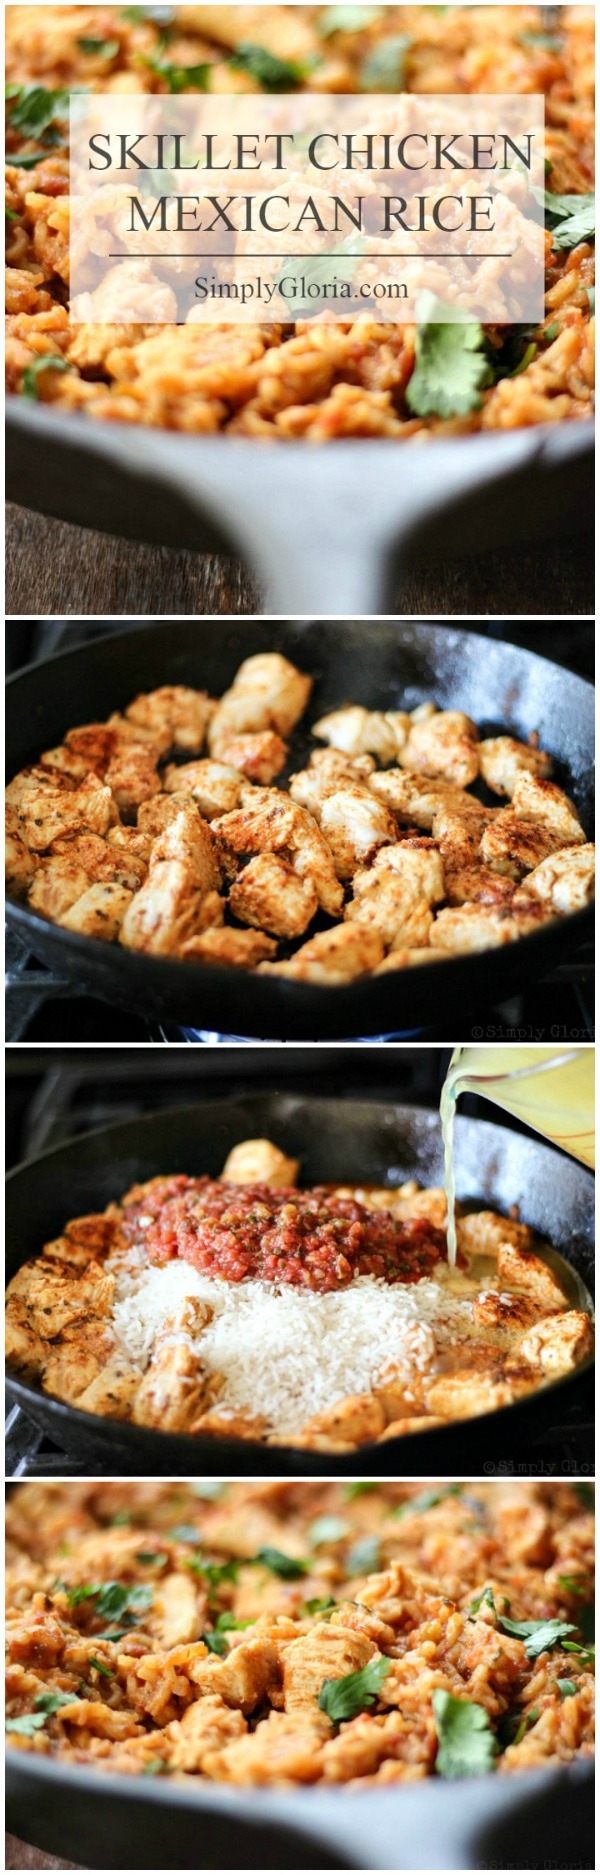 Skillet Chicken Mexican Rice with SimplyGloria.com #chicken #dinner